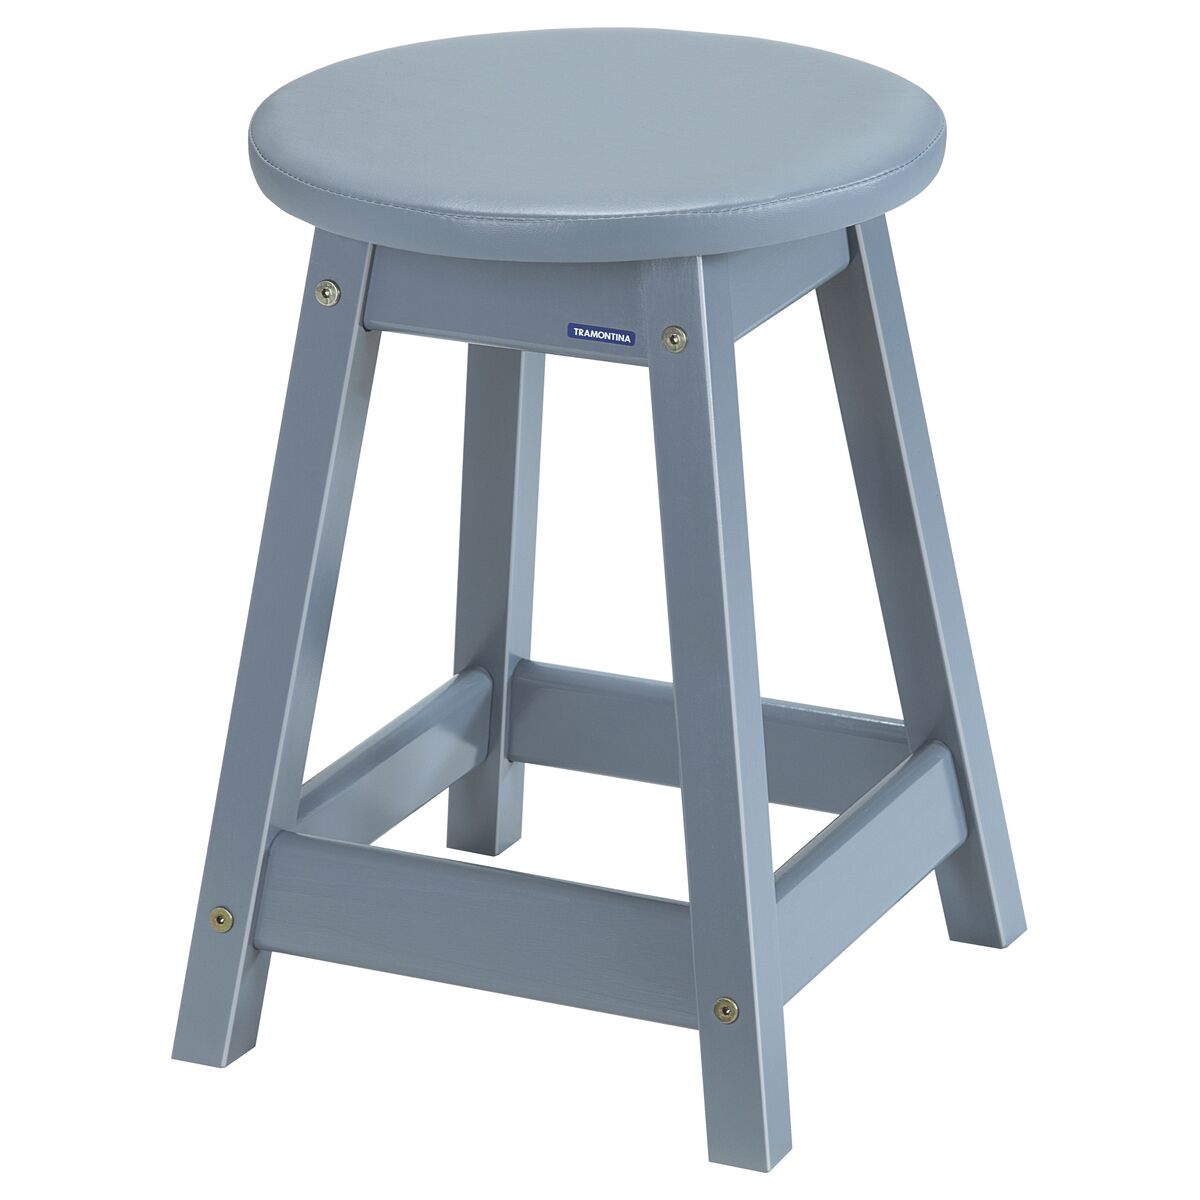 Tramontina Vin Stool with Gray Synthetic Leather Lining
